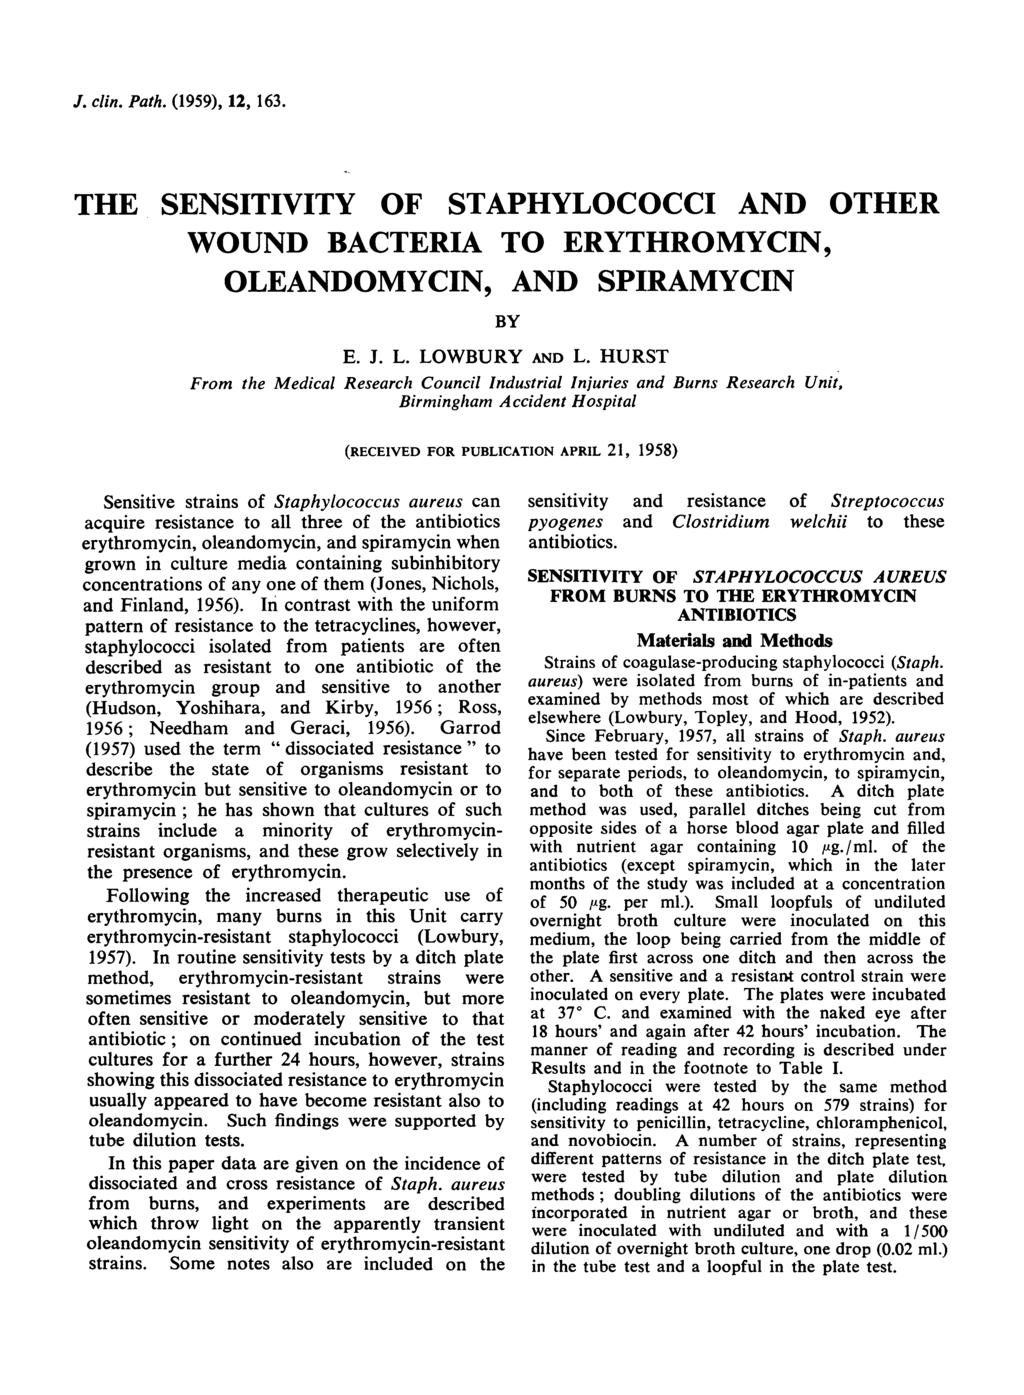 J. clin. Path. (1959), 12, 163. THE SENSITIVITY OF STAPHYLOCOCCI AND OTHER WOUND BACTERIA TO ERYTHROMYCIN, OLEANDOMYCIN, AND SPIRAMYCIN BY E. J. L. LOWBURY AND L.